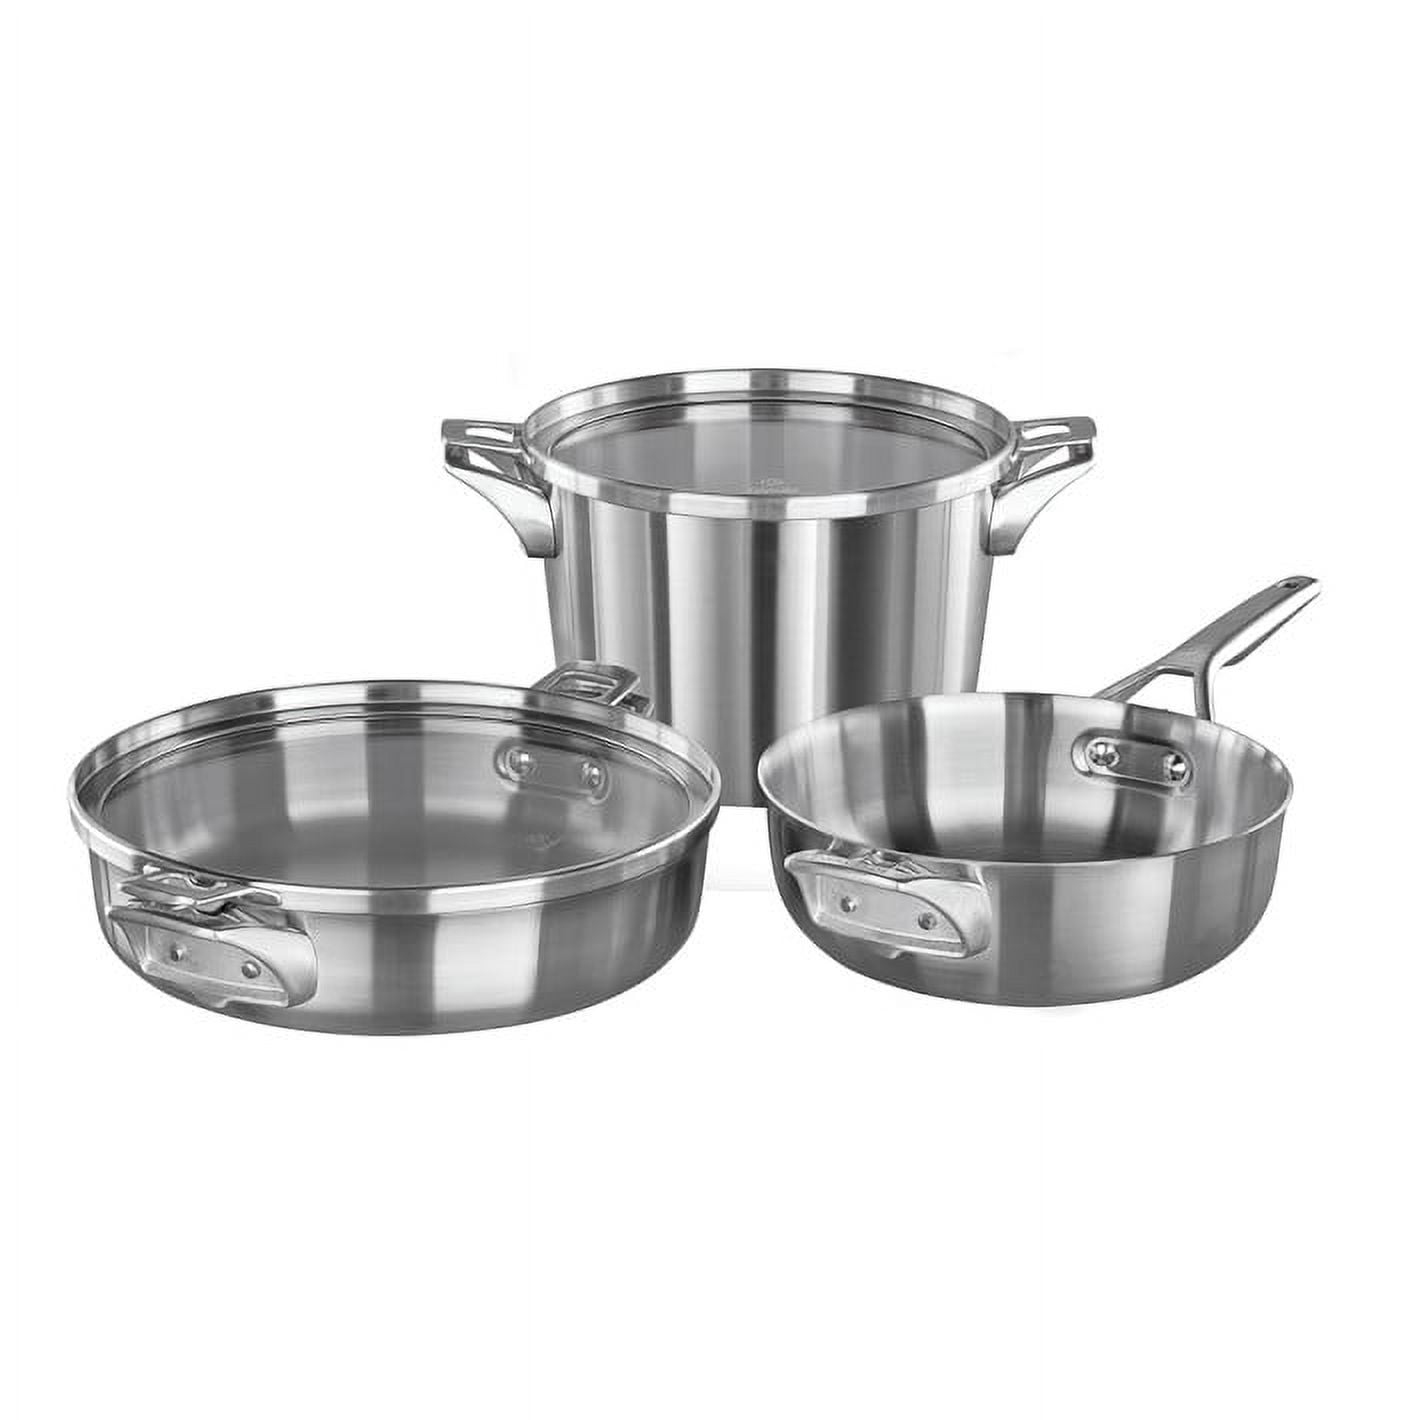 Calphalon Premier Space Saving Stainless Steel Cookware Set Review & Demo